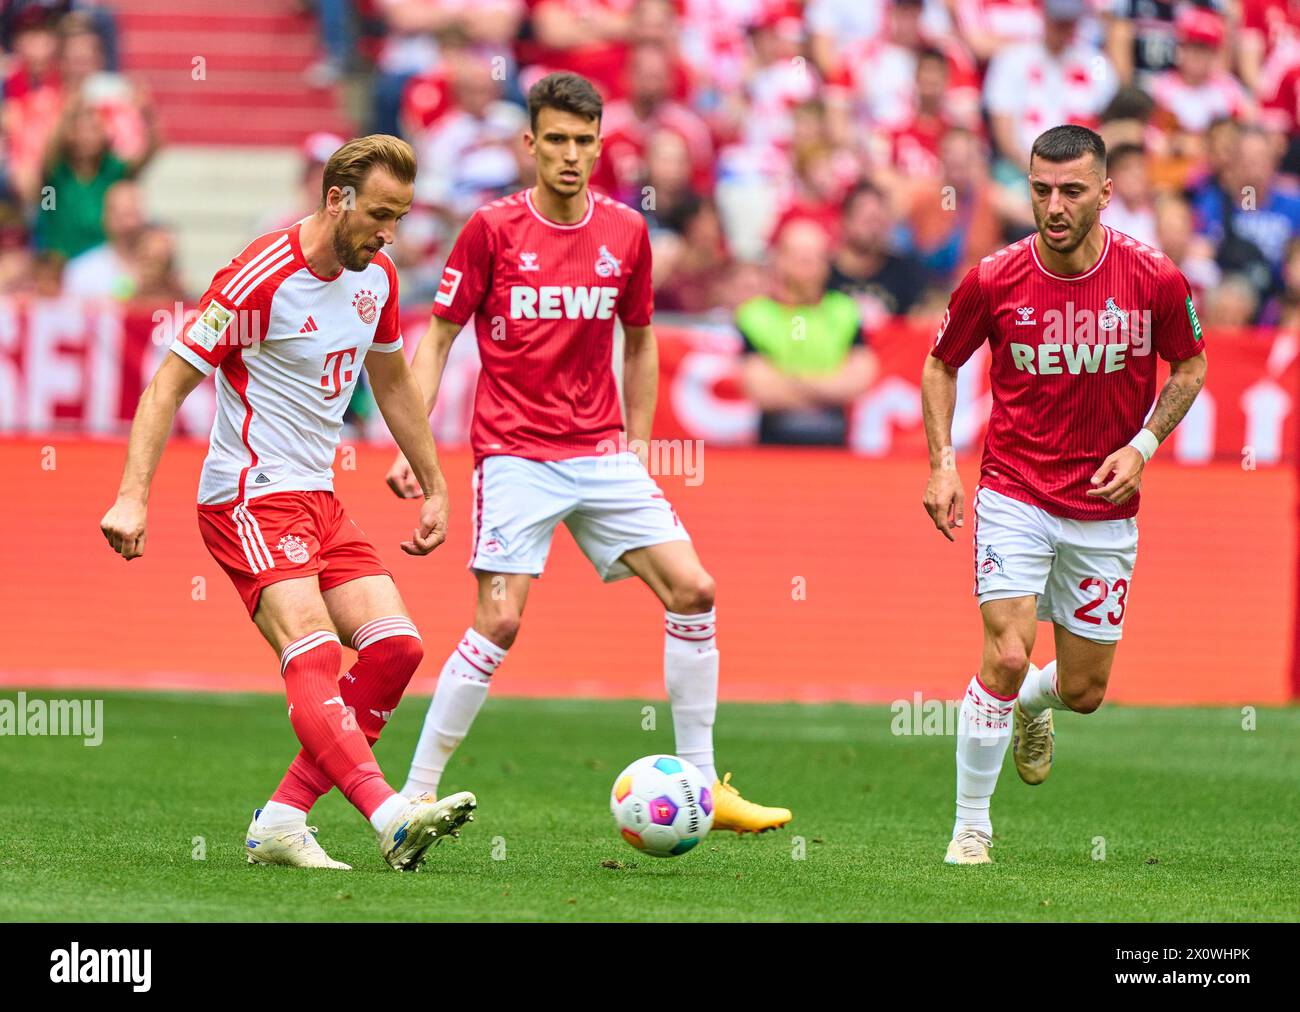 fcb9  compete for the ball, tackling, duel, header, zweikampf, action, fight against Dejan Ljubicic, 1.FCK 7 Sargis Adamyan, 1.FCK 23   in the match  FC BAYERN MUENCHEN - 1.FC KOeLN 2-0   on April 13, 2024 in Munich, Germany. Season 2023/2024, 1.Bundesliga, FCB,, Muenchen, matchday 29, 29.Spieltag Photographer: ddp images / star-images    - DFL REGULATIONS PROHIBIT ANY USE OF PHOTOGRAPHS as IMAGE SEQUENCES and/or QUASI-VIDEO - Stock Photo